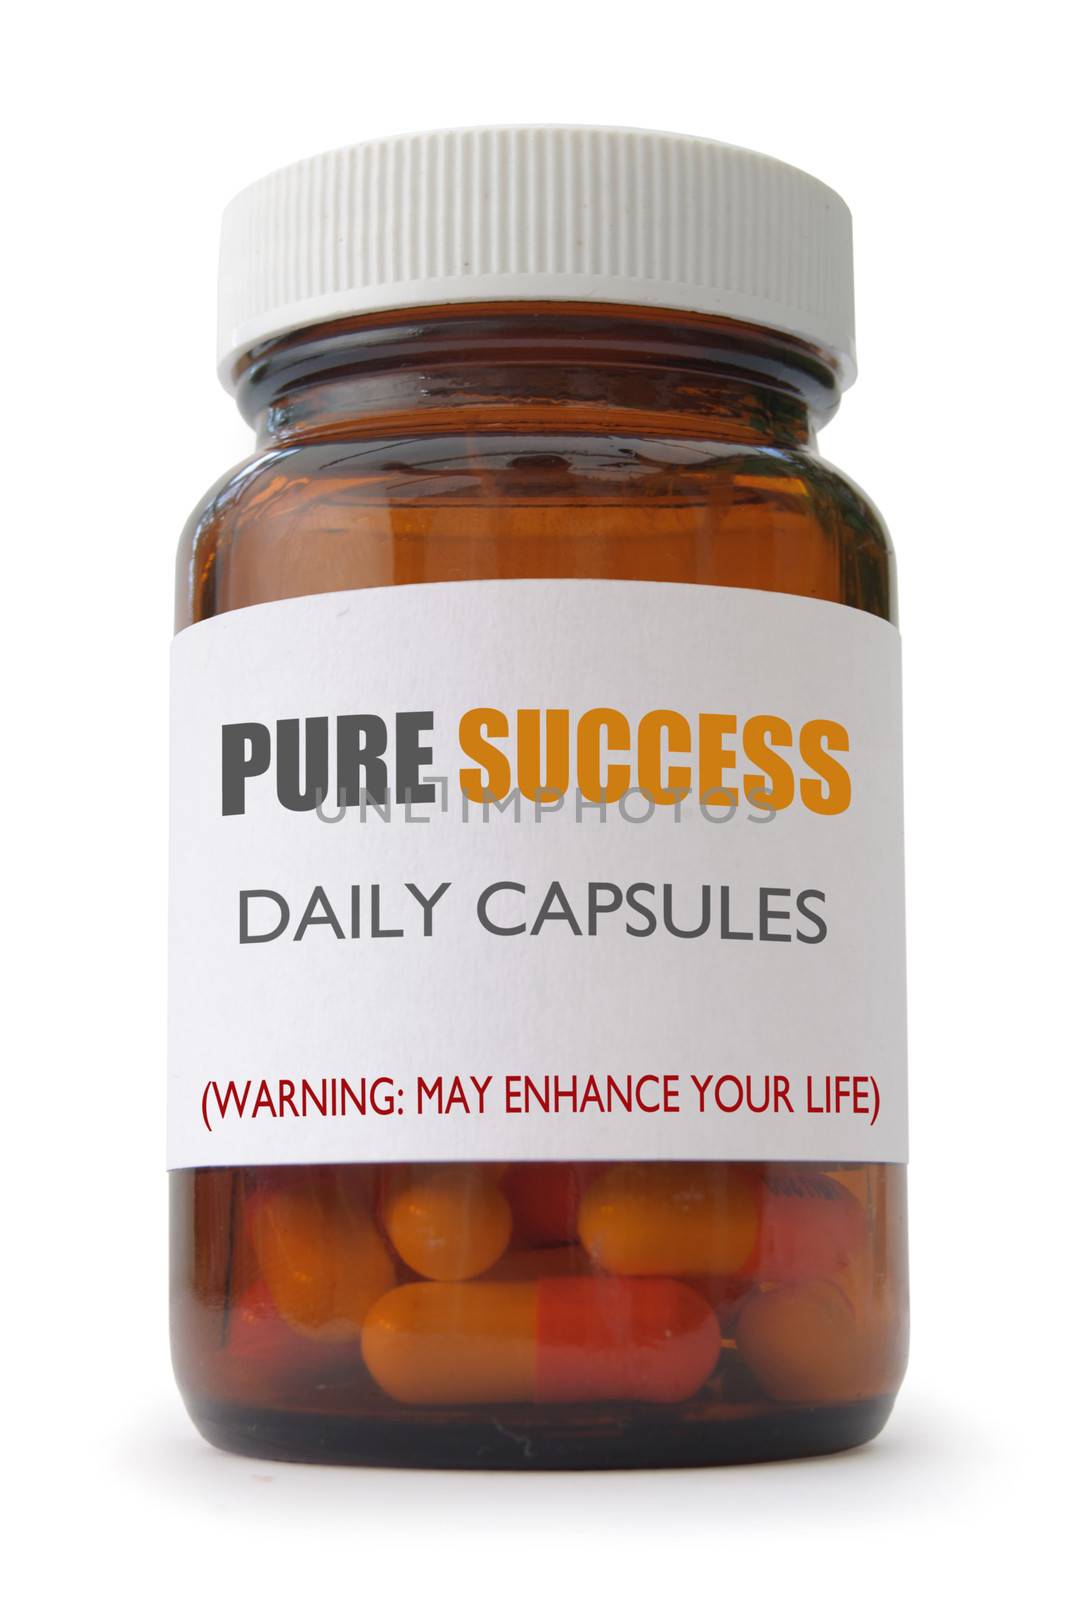 Metaphor for success with capsules inside a container over white background 